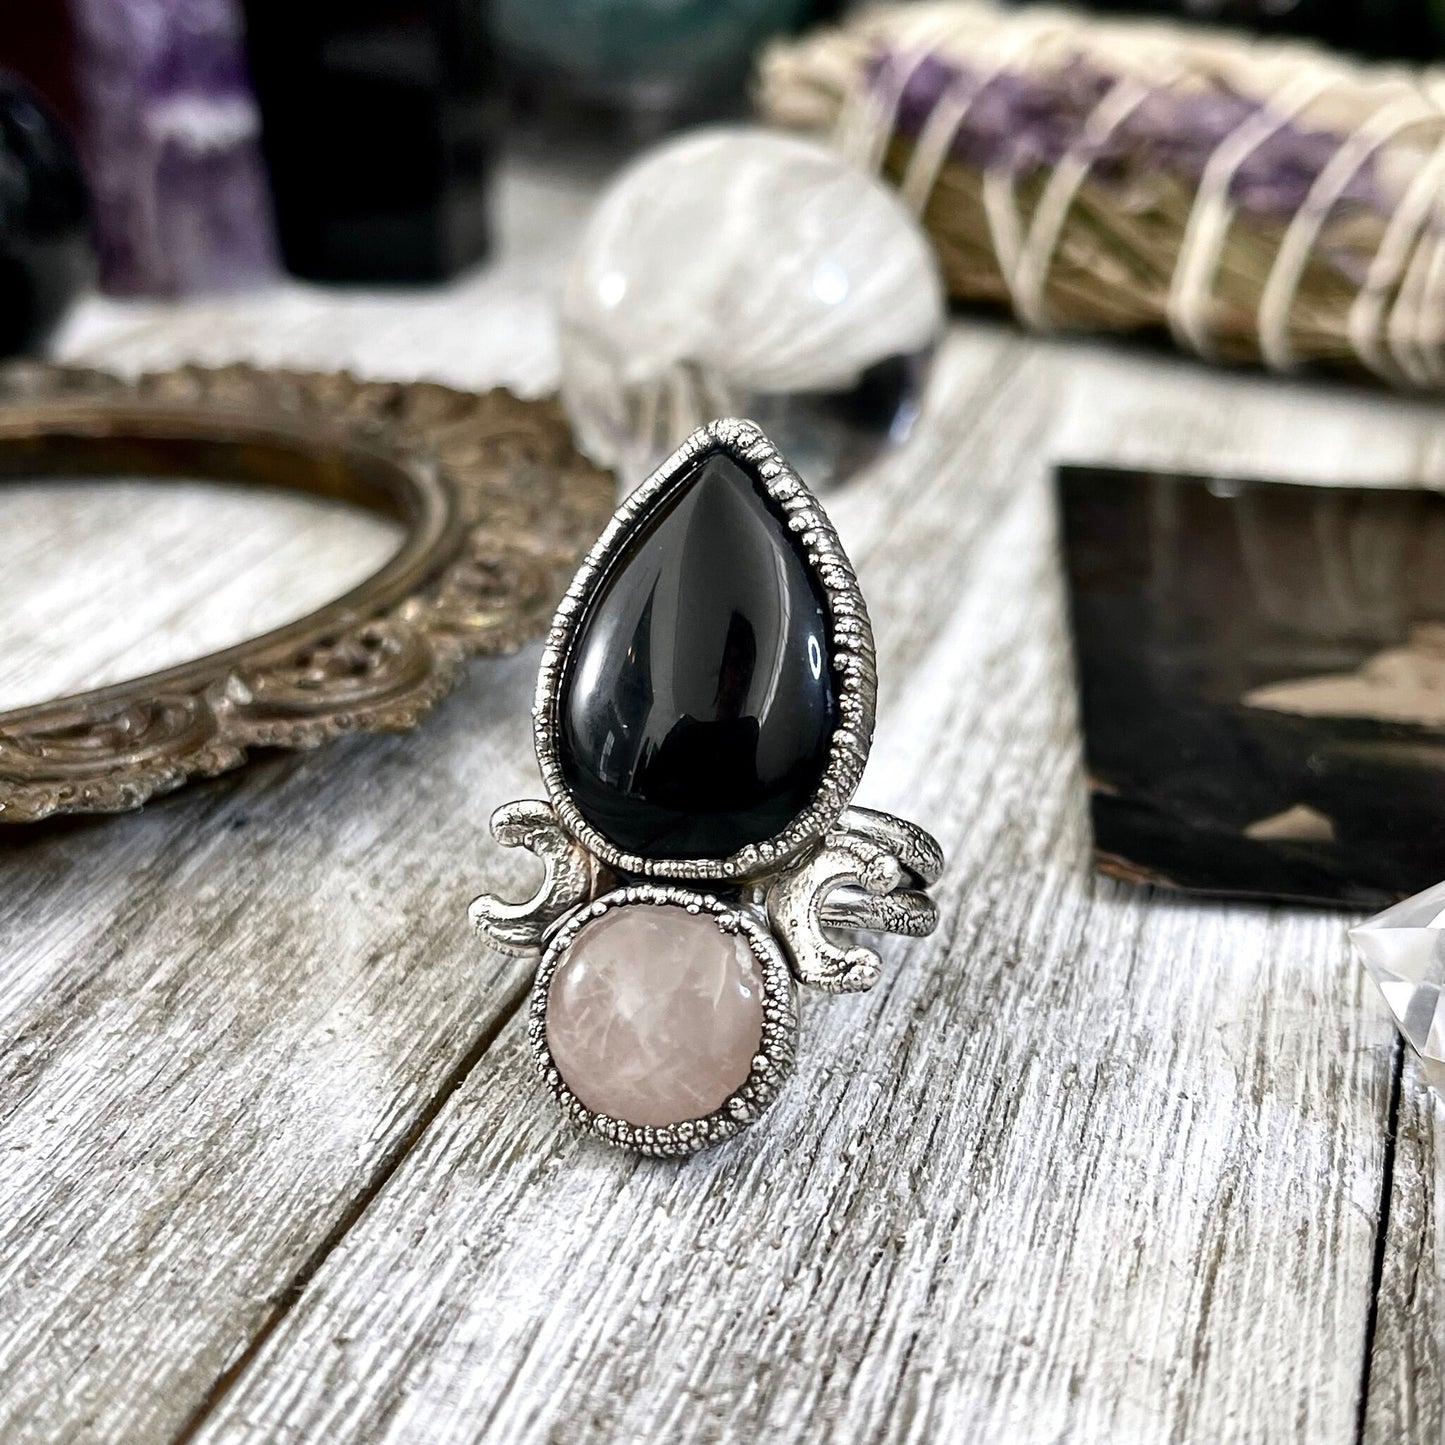 Size 10 Two Stone Ring- Black Onyx Rose Quartz Crystal Ring Fine Silver / Foxlark Collection - One of a Kind / Statement Jewelry